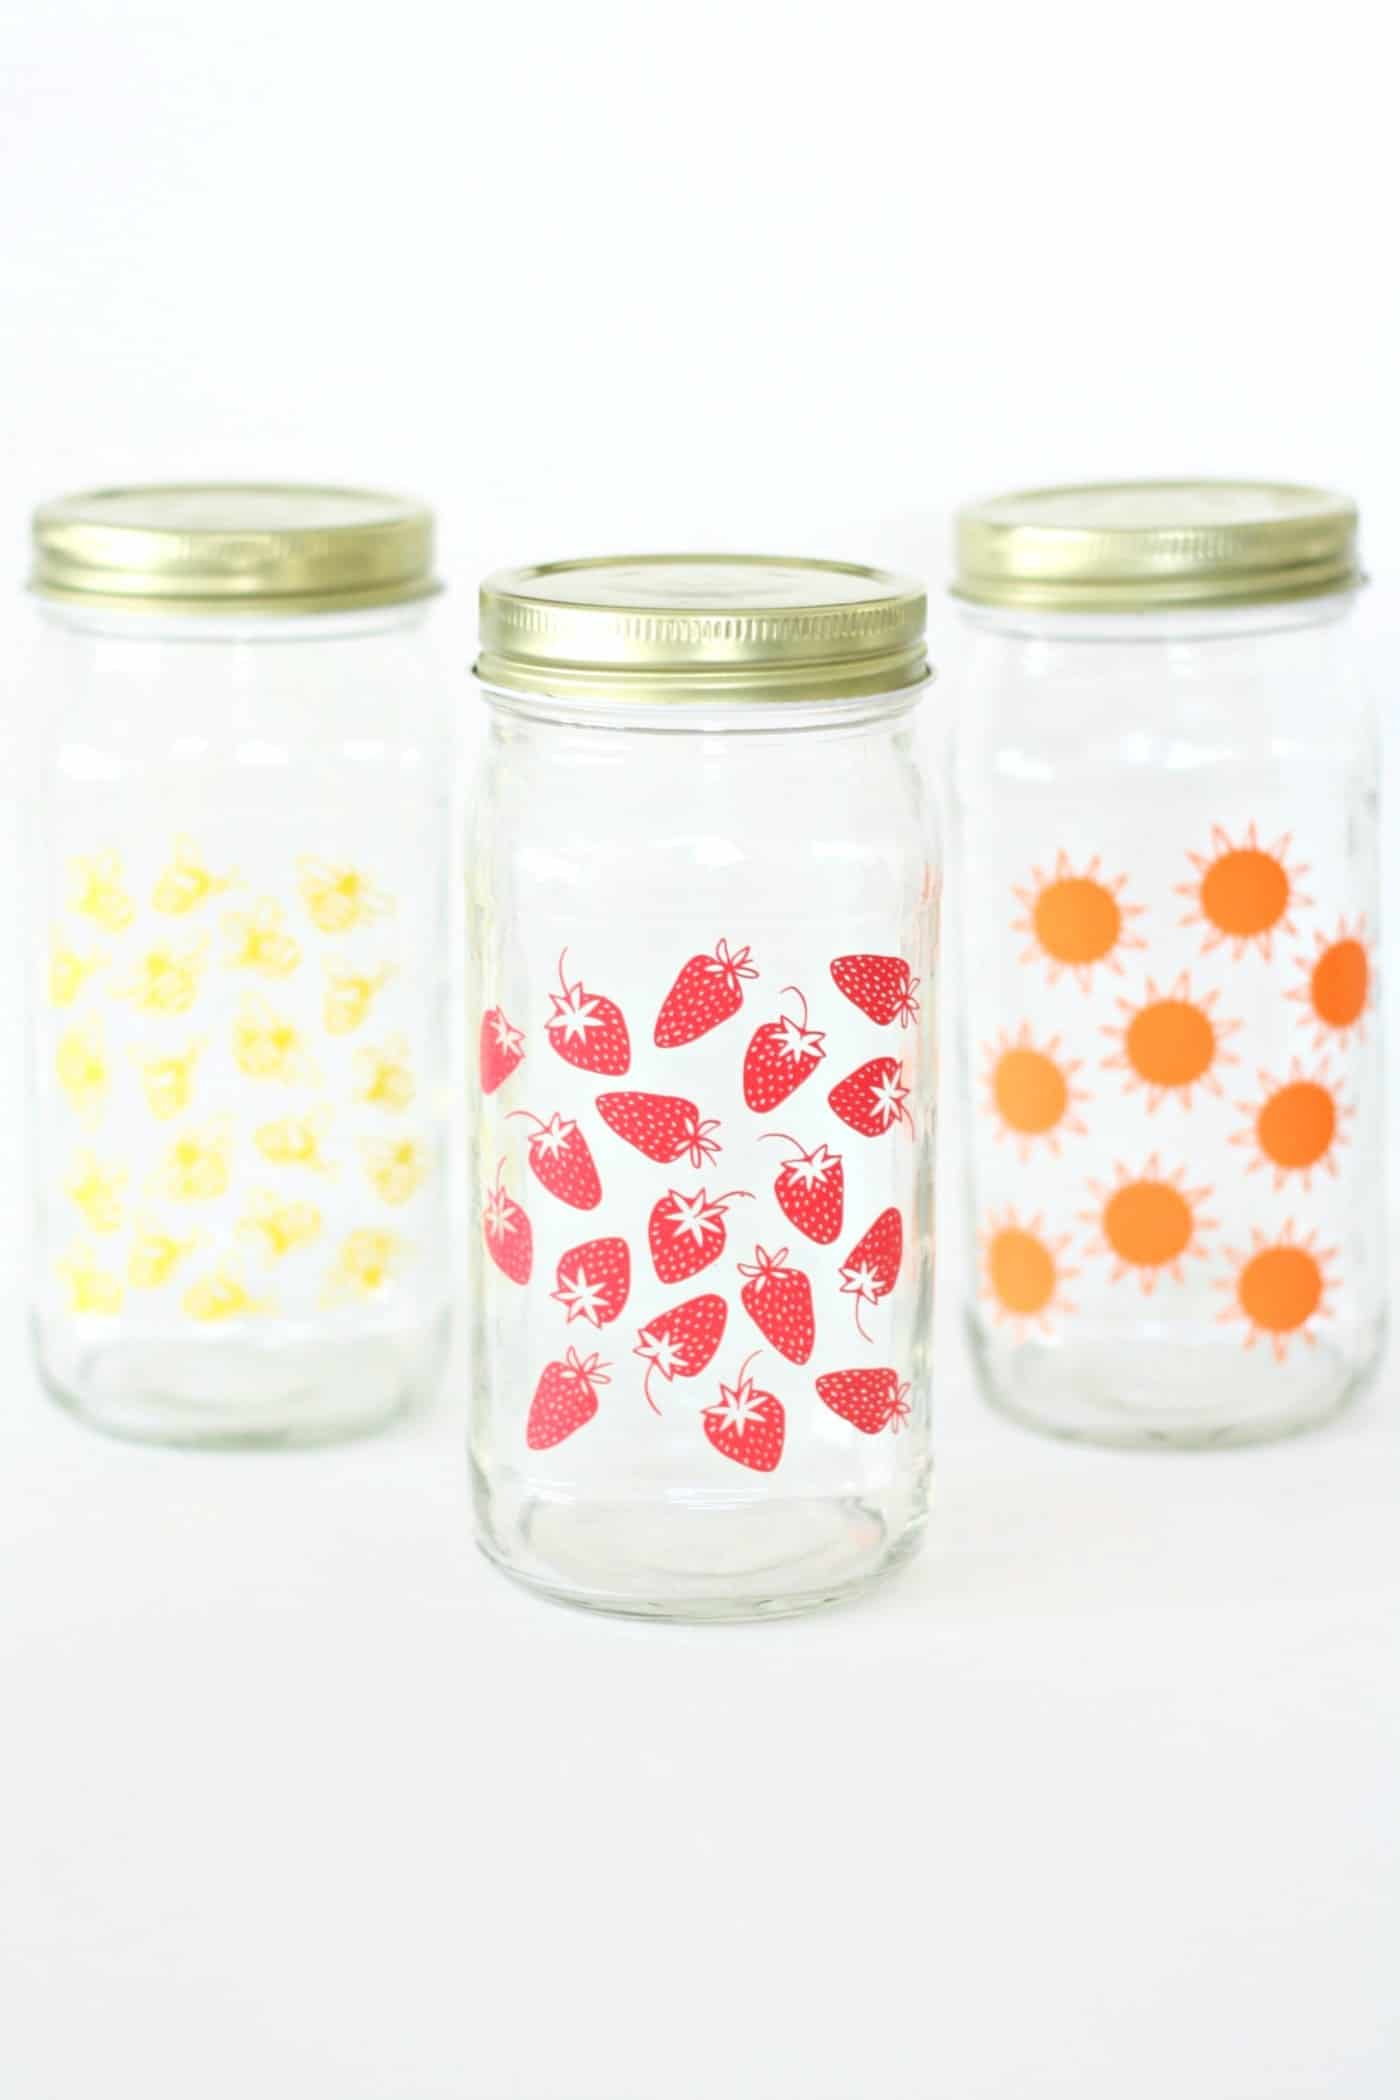 Follow this simple tutorial to upcycle a glass jar you have hanging out in your pantry. This summer craft is perfect for parties and picnics!